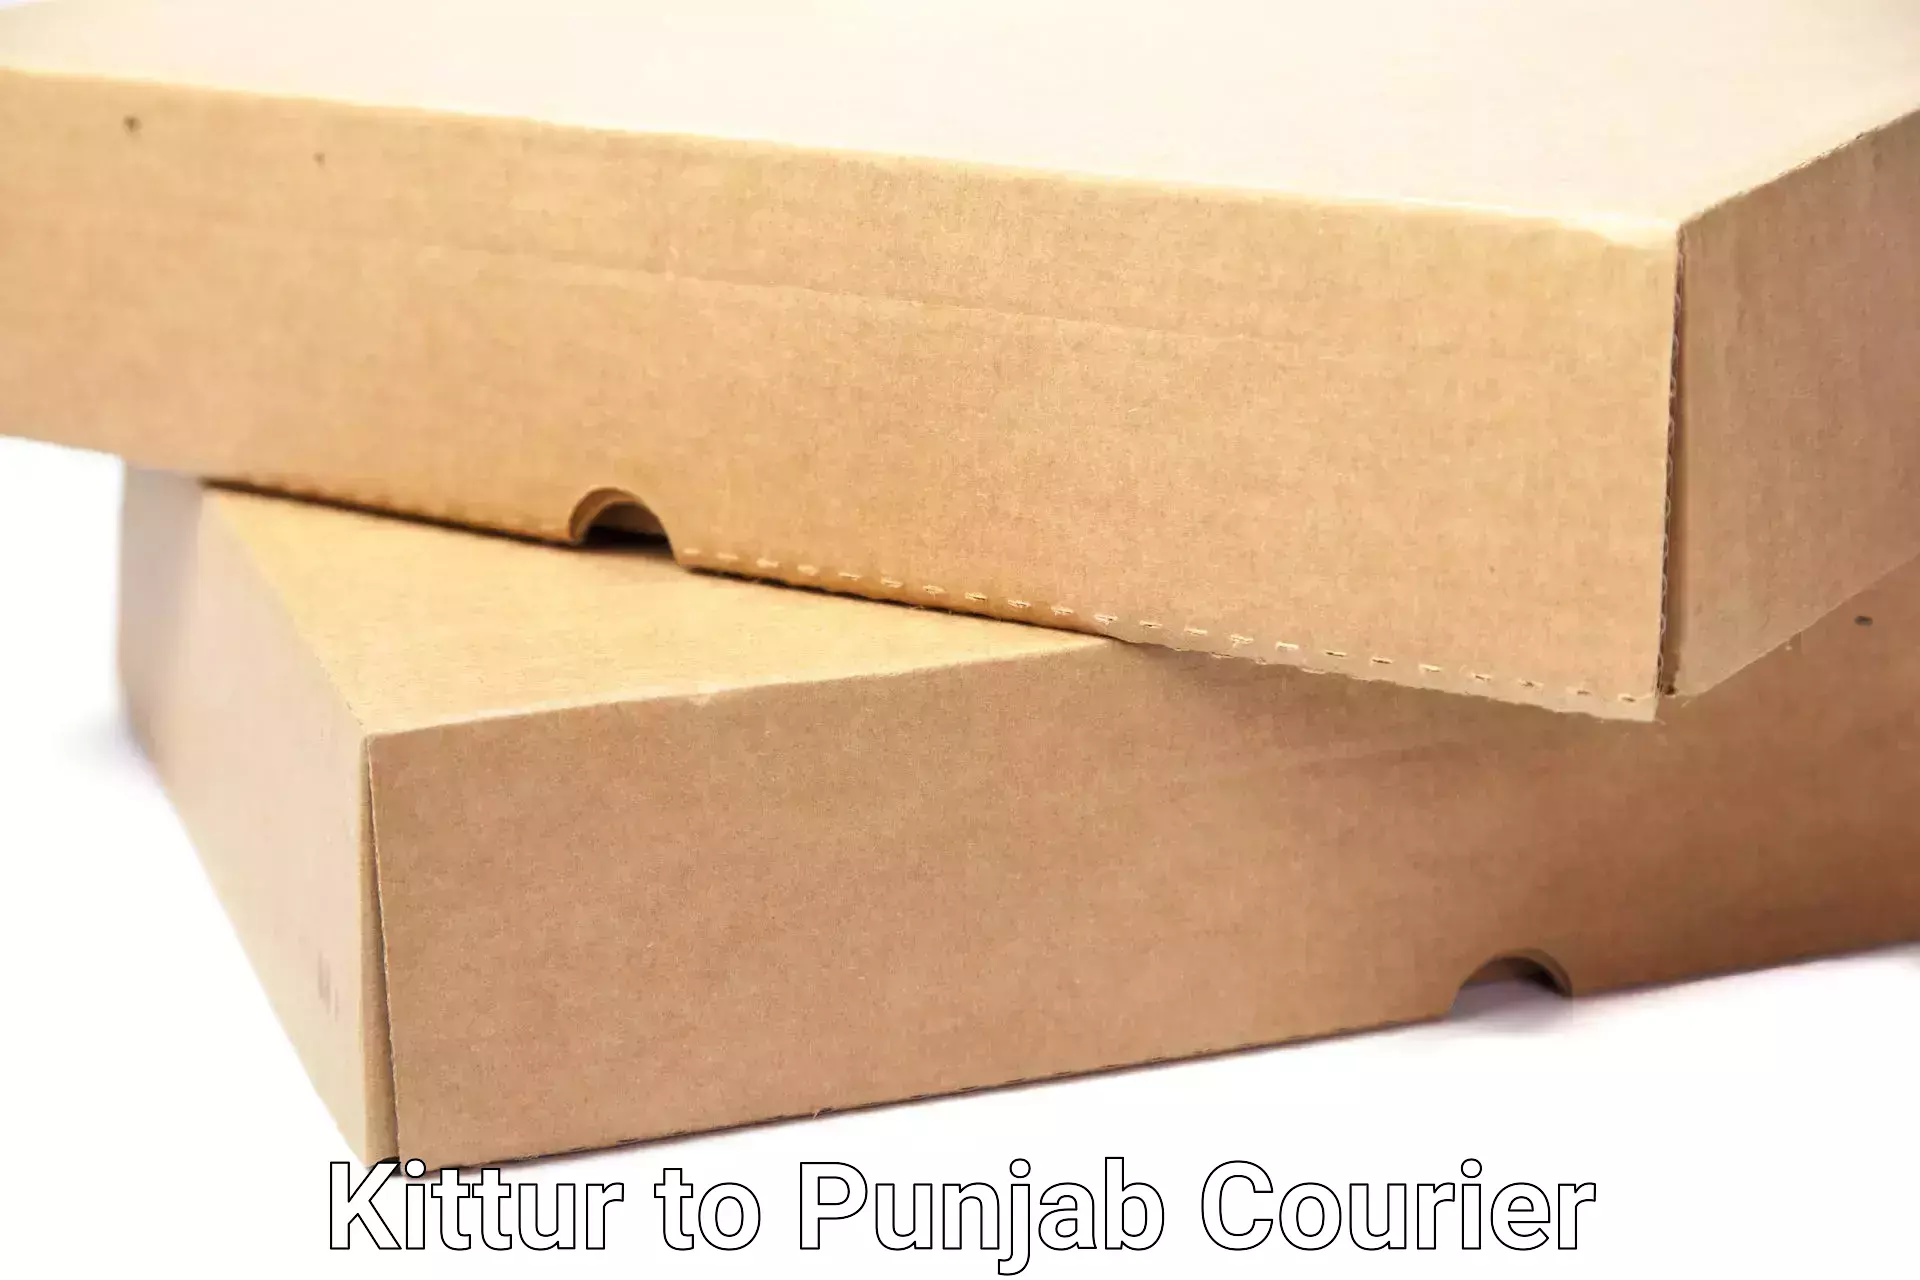 High-quality moving services in Kittur to Punjab